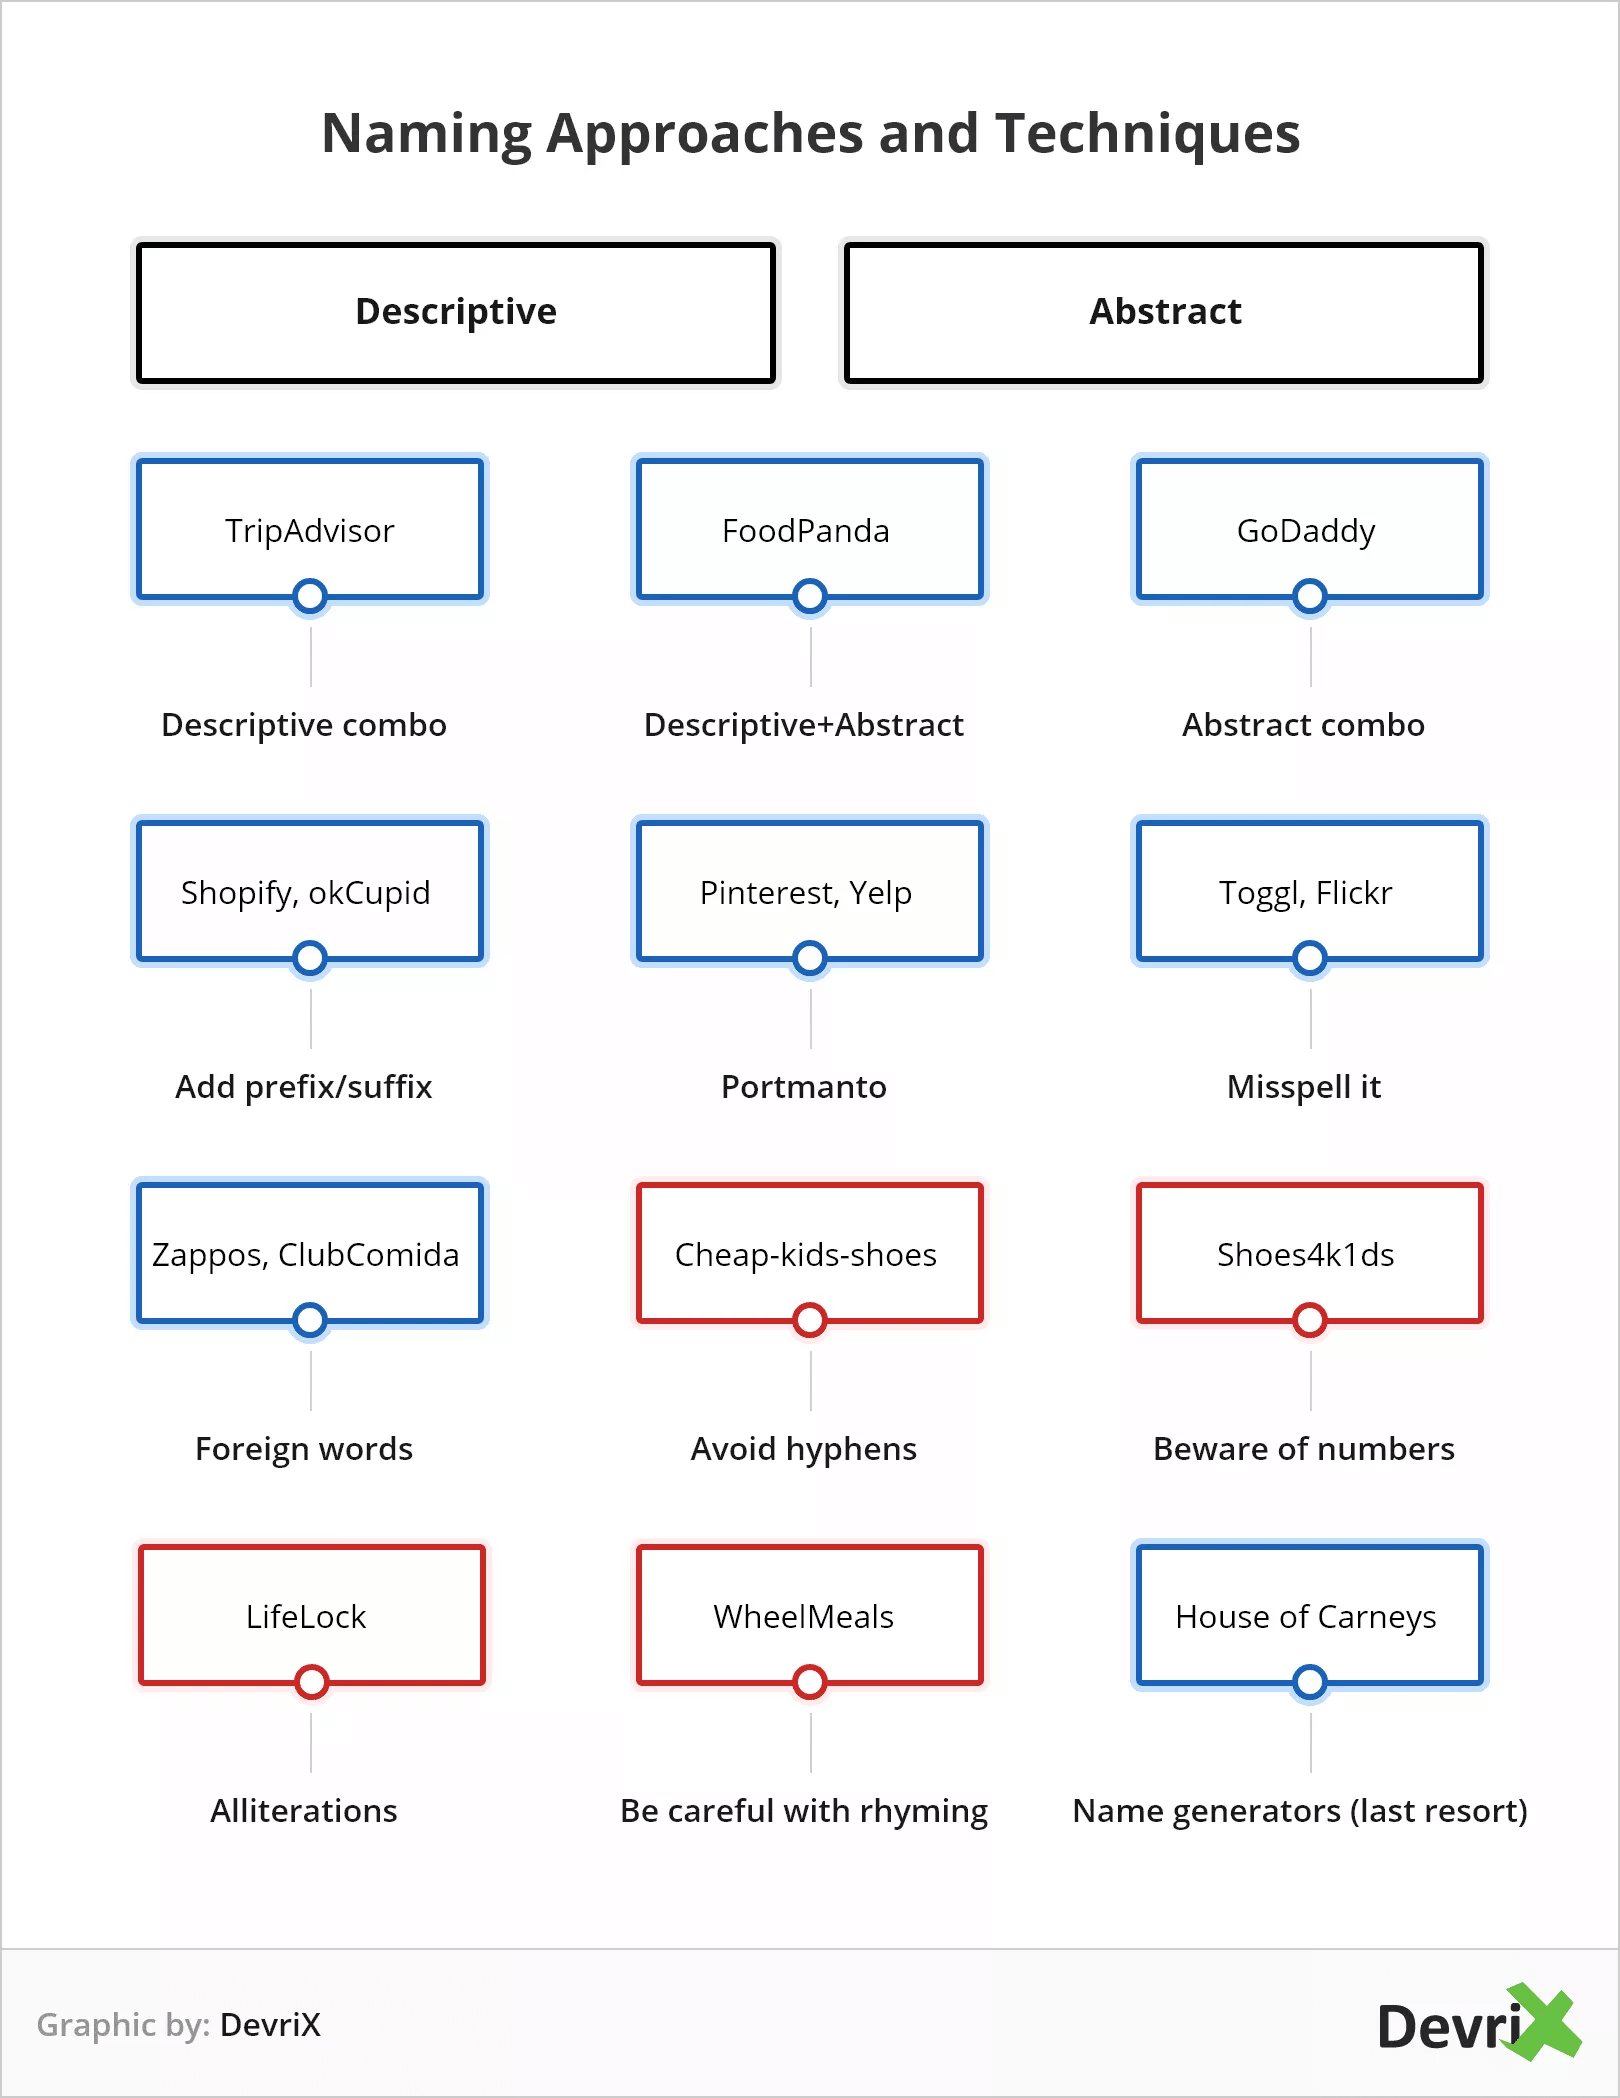 Naming Approaches and Techniques